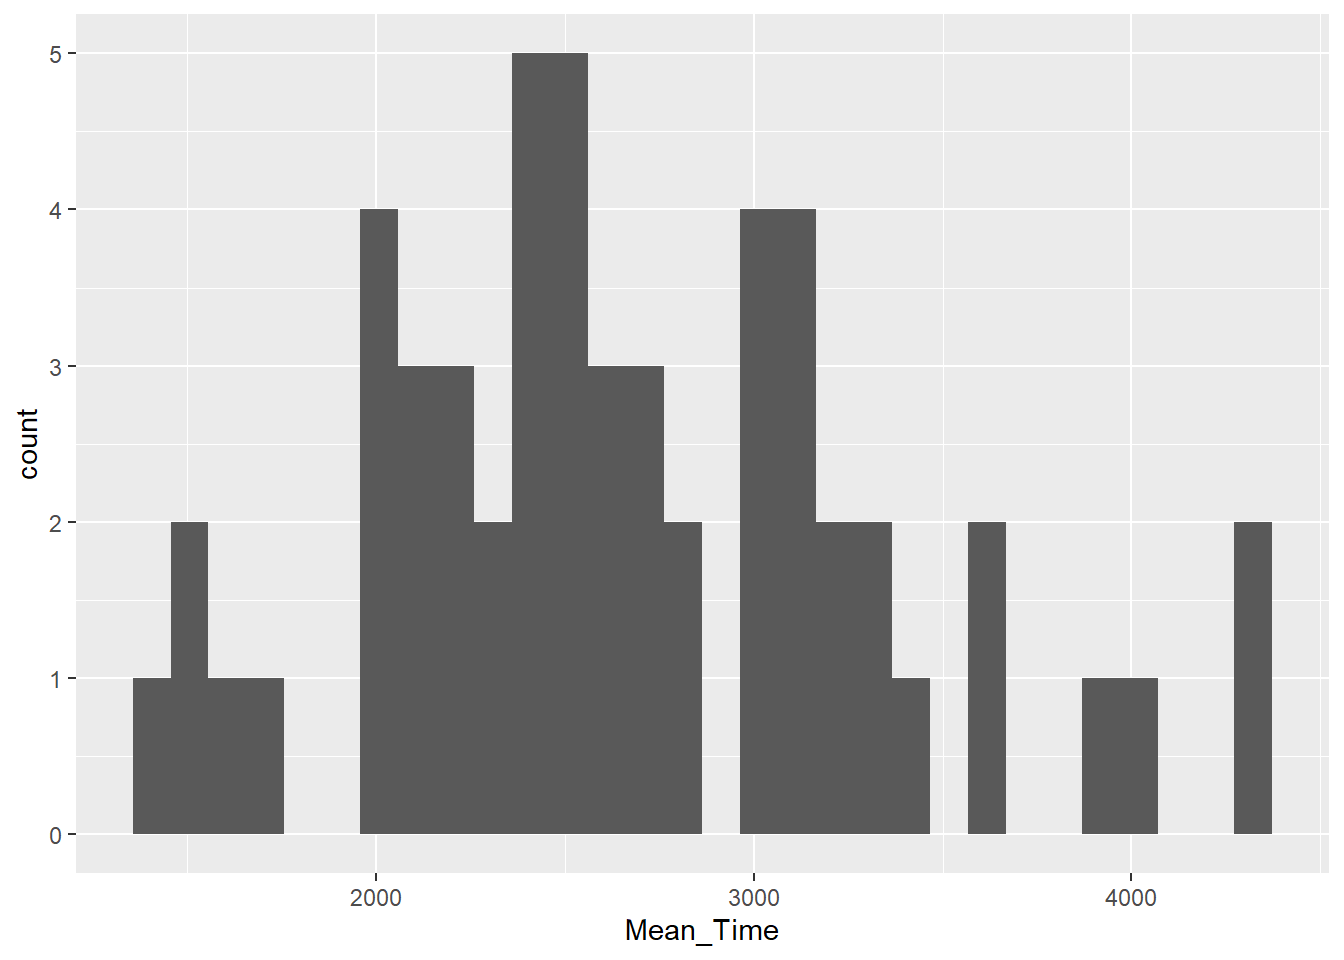 A histogram of distribution of Mean Time counts